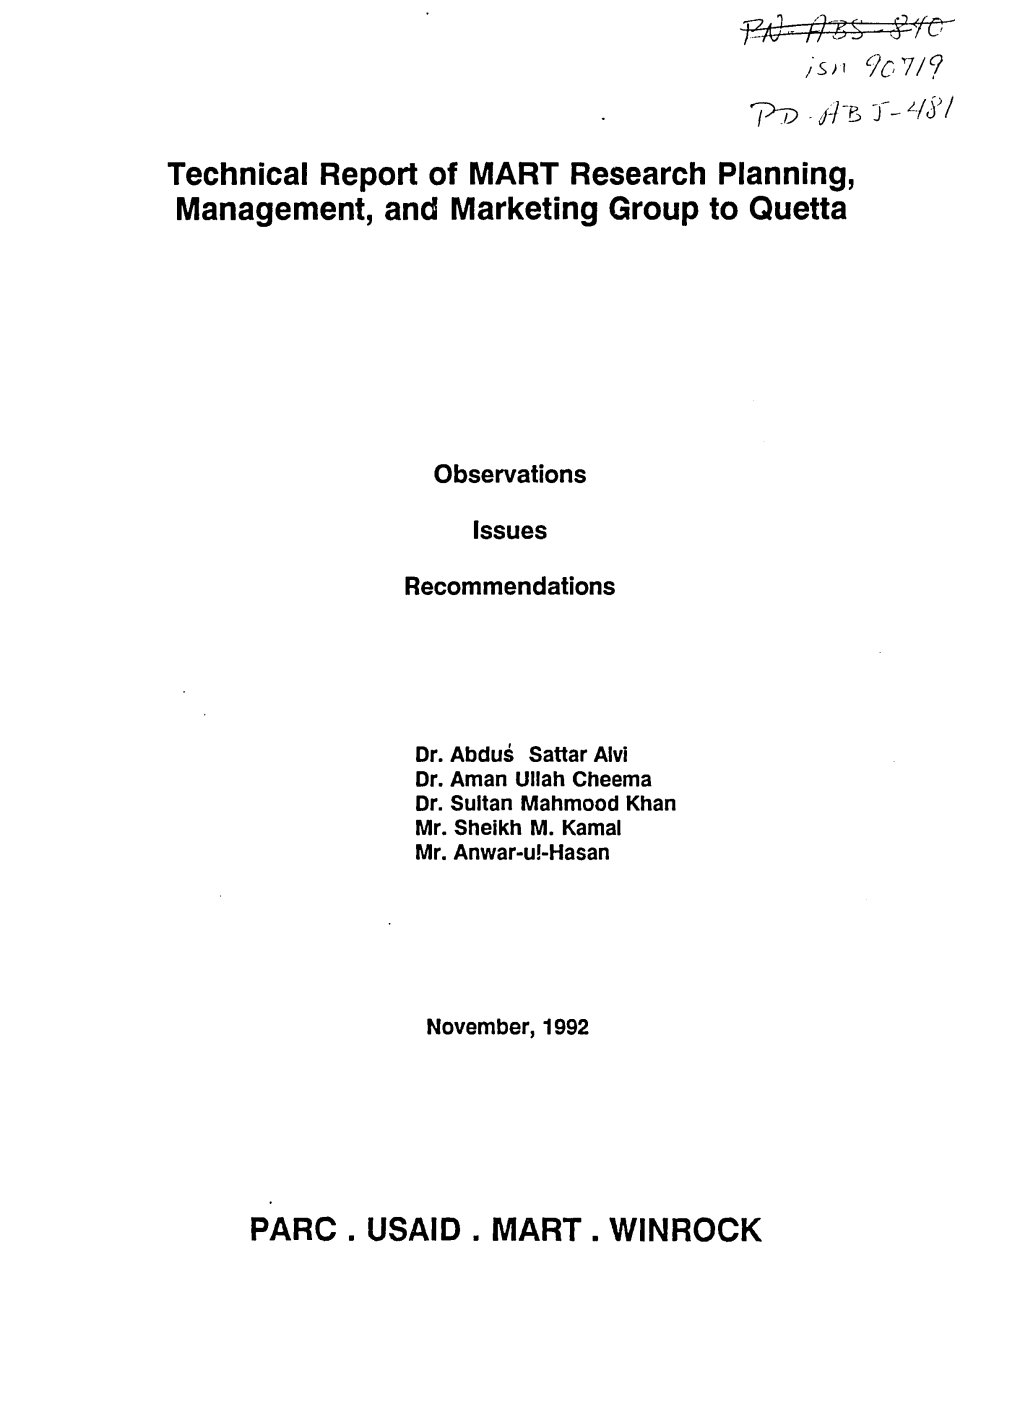 Technical Report of MART Research Planning, Management, and Marketing Group to Quetta PARC. USAID. MART. WINROCK